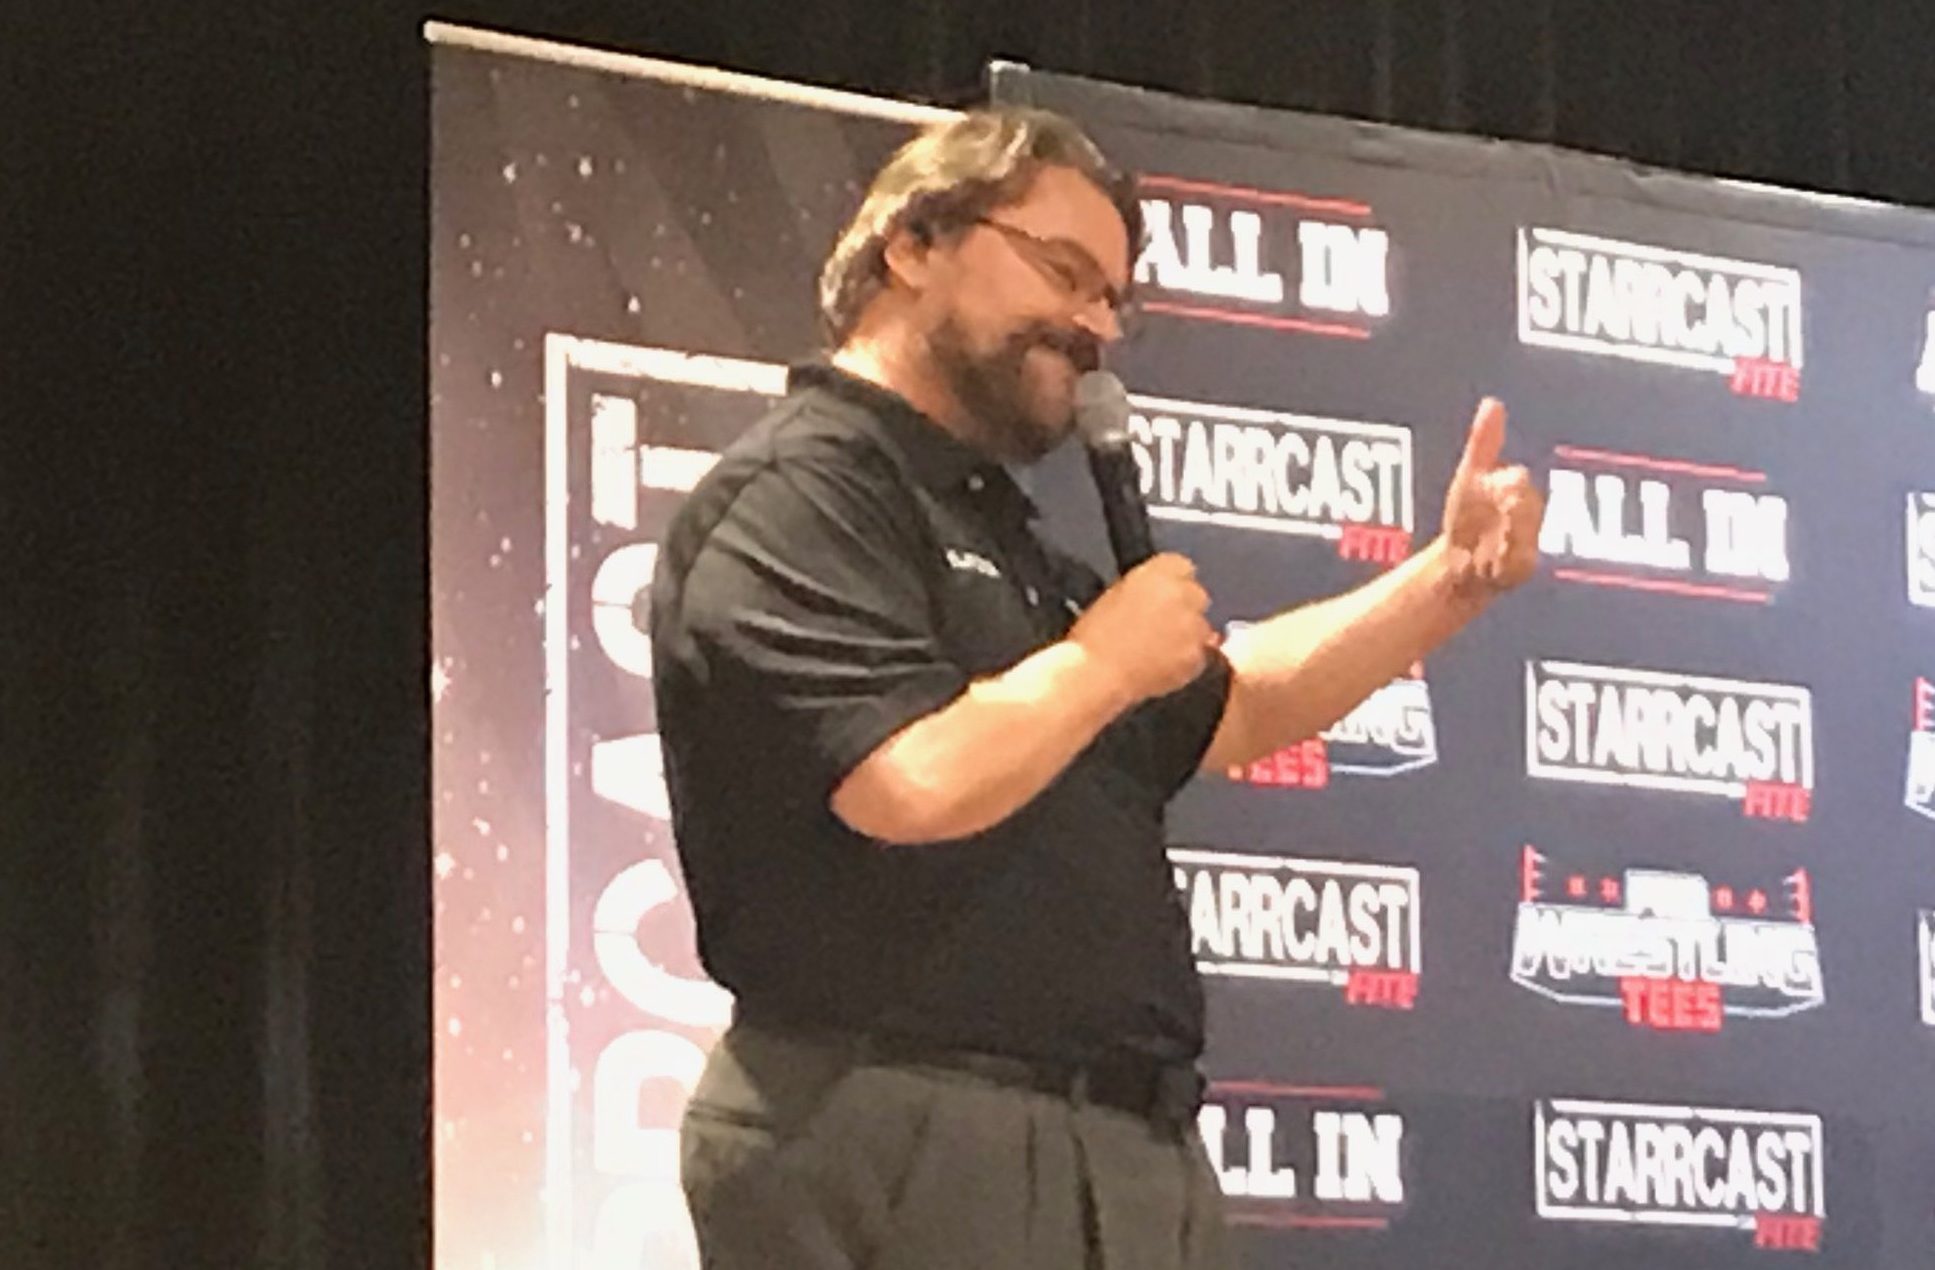 The Stars (And Fans) Aligned: 23 Unique Starrcast Experiences